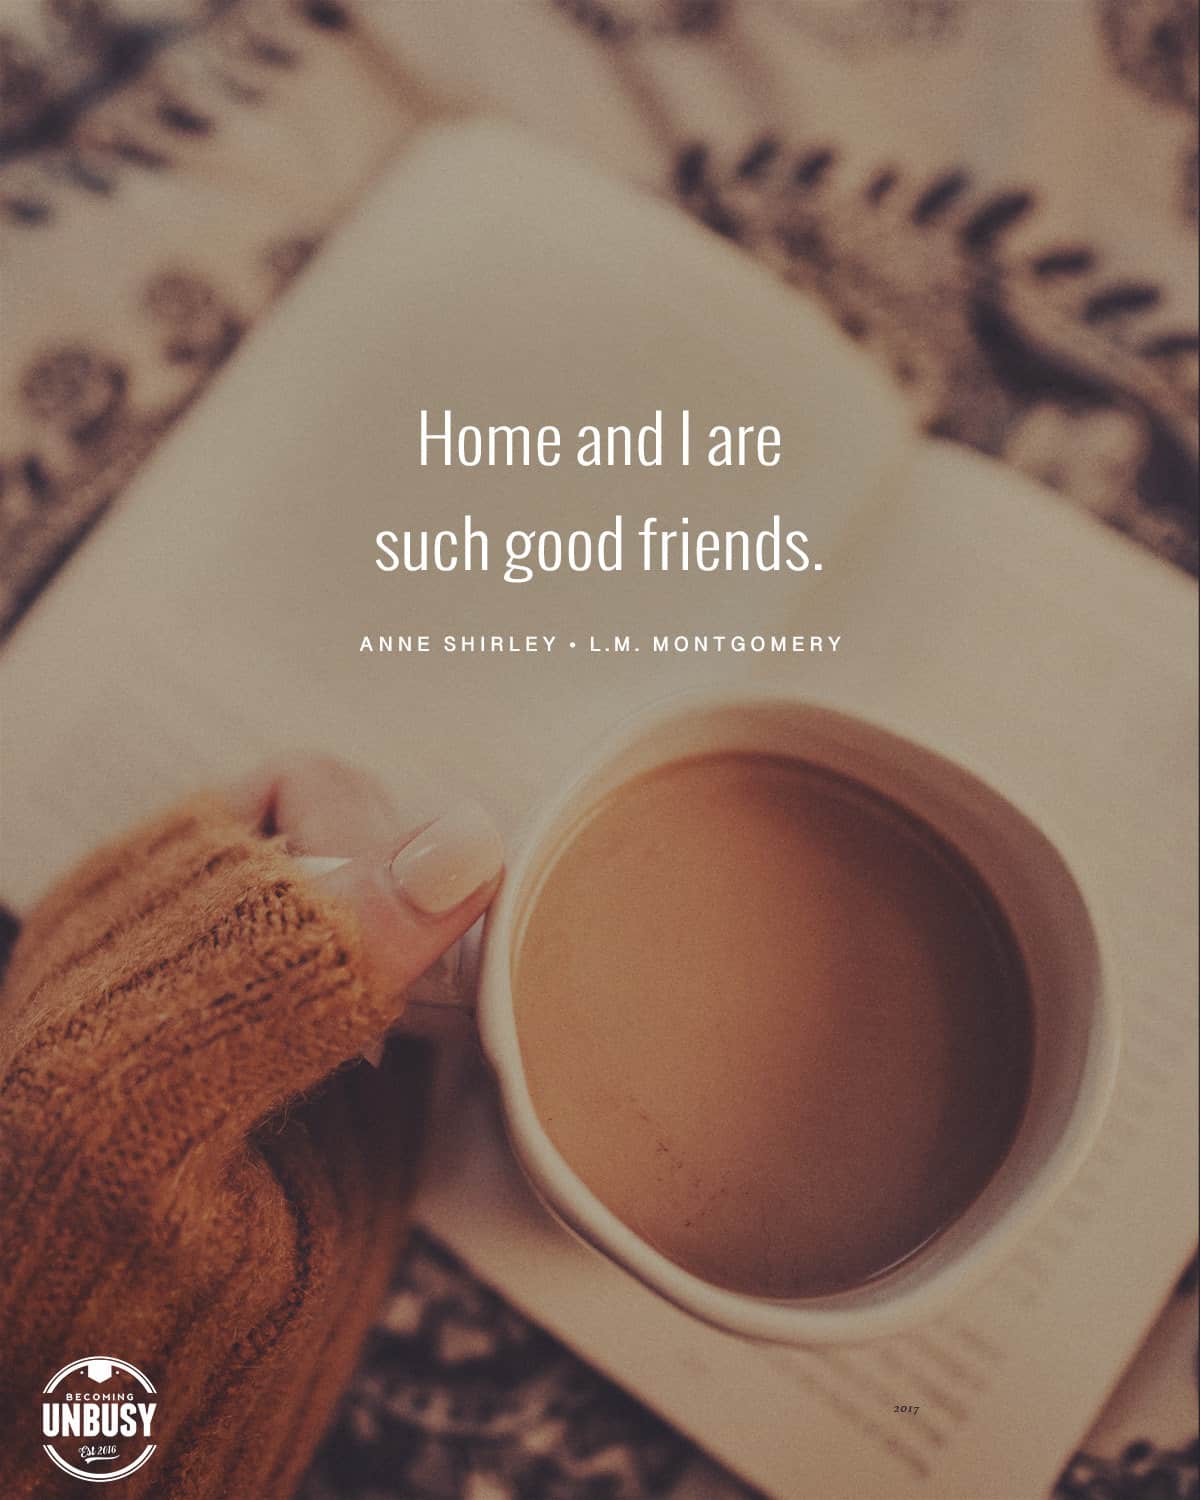 The following fall bucket list quote written over a photo of a woman holding a hot cup of coffee while wearing a chunky autumn sweater, "Home and I are such good friends. — Anne Shirley."